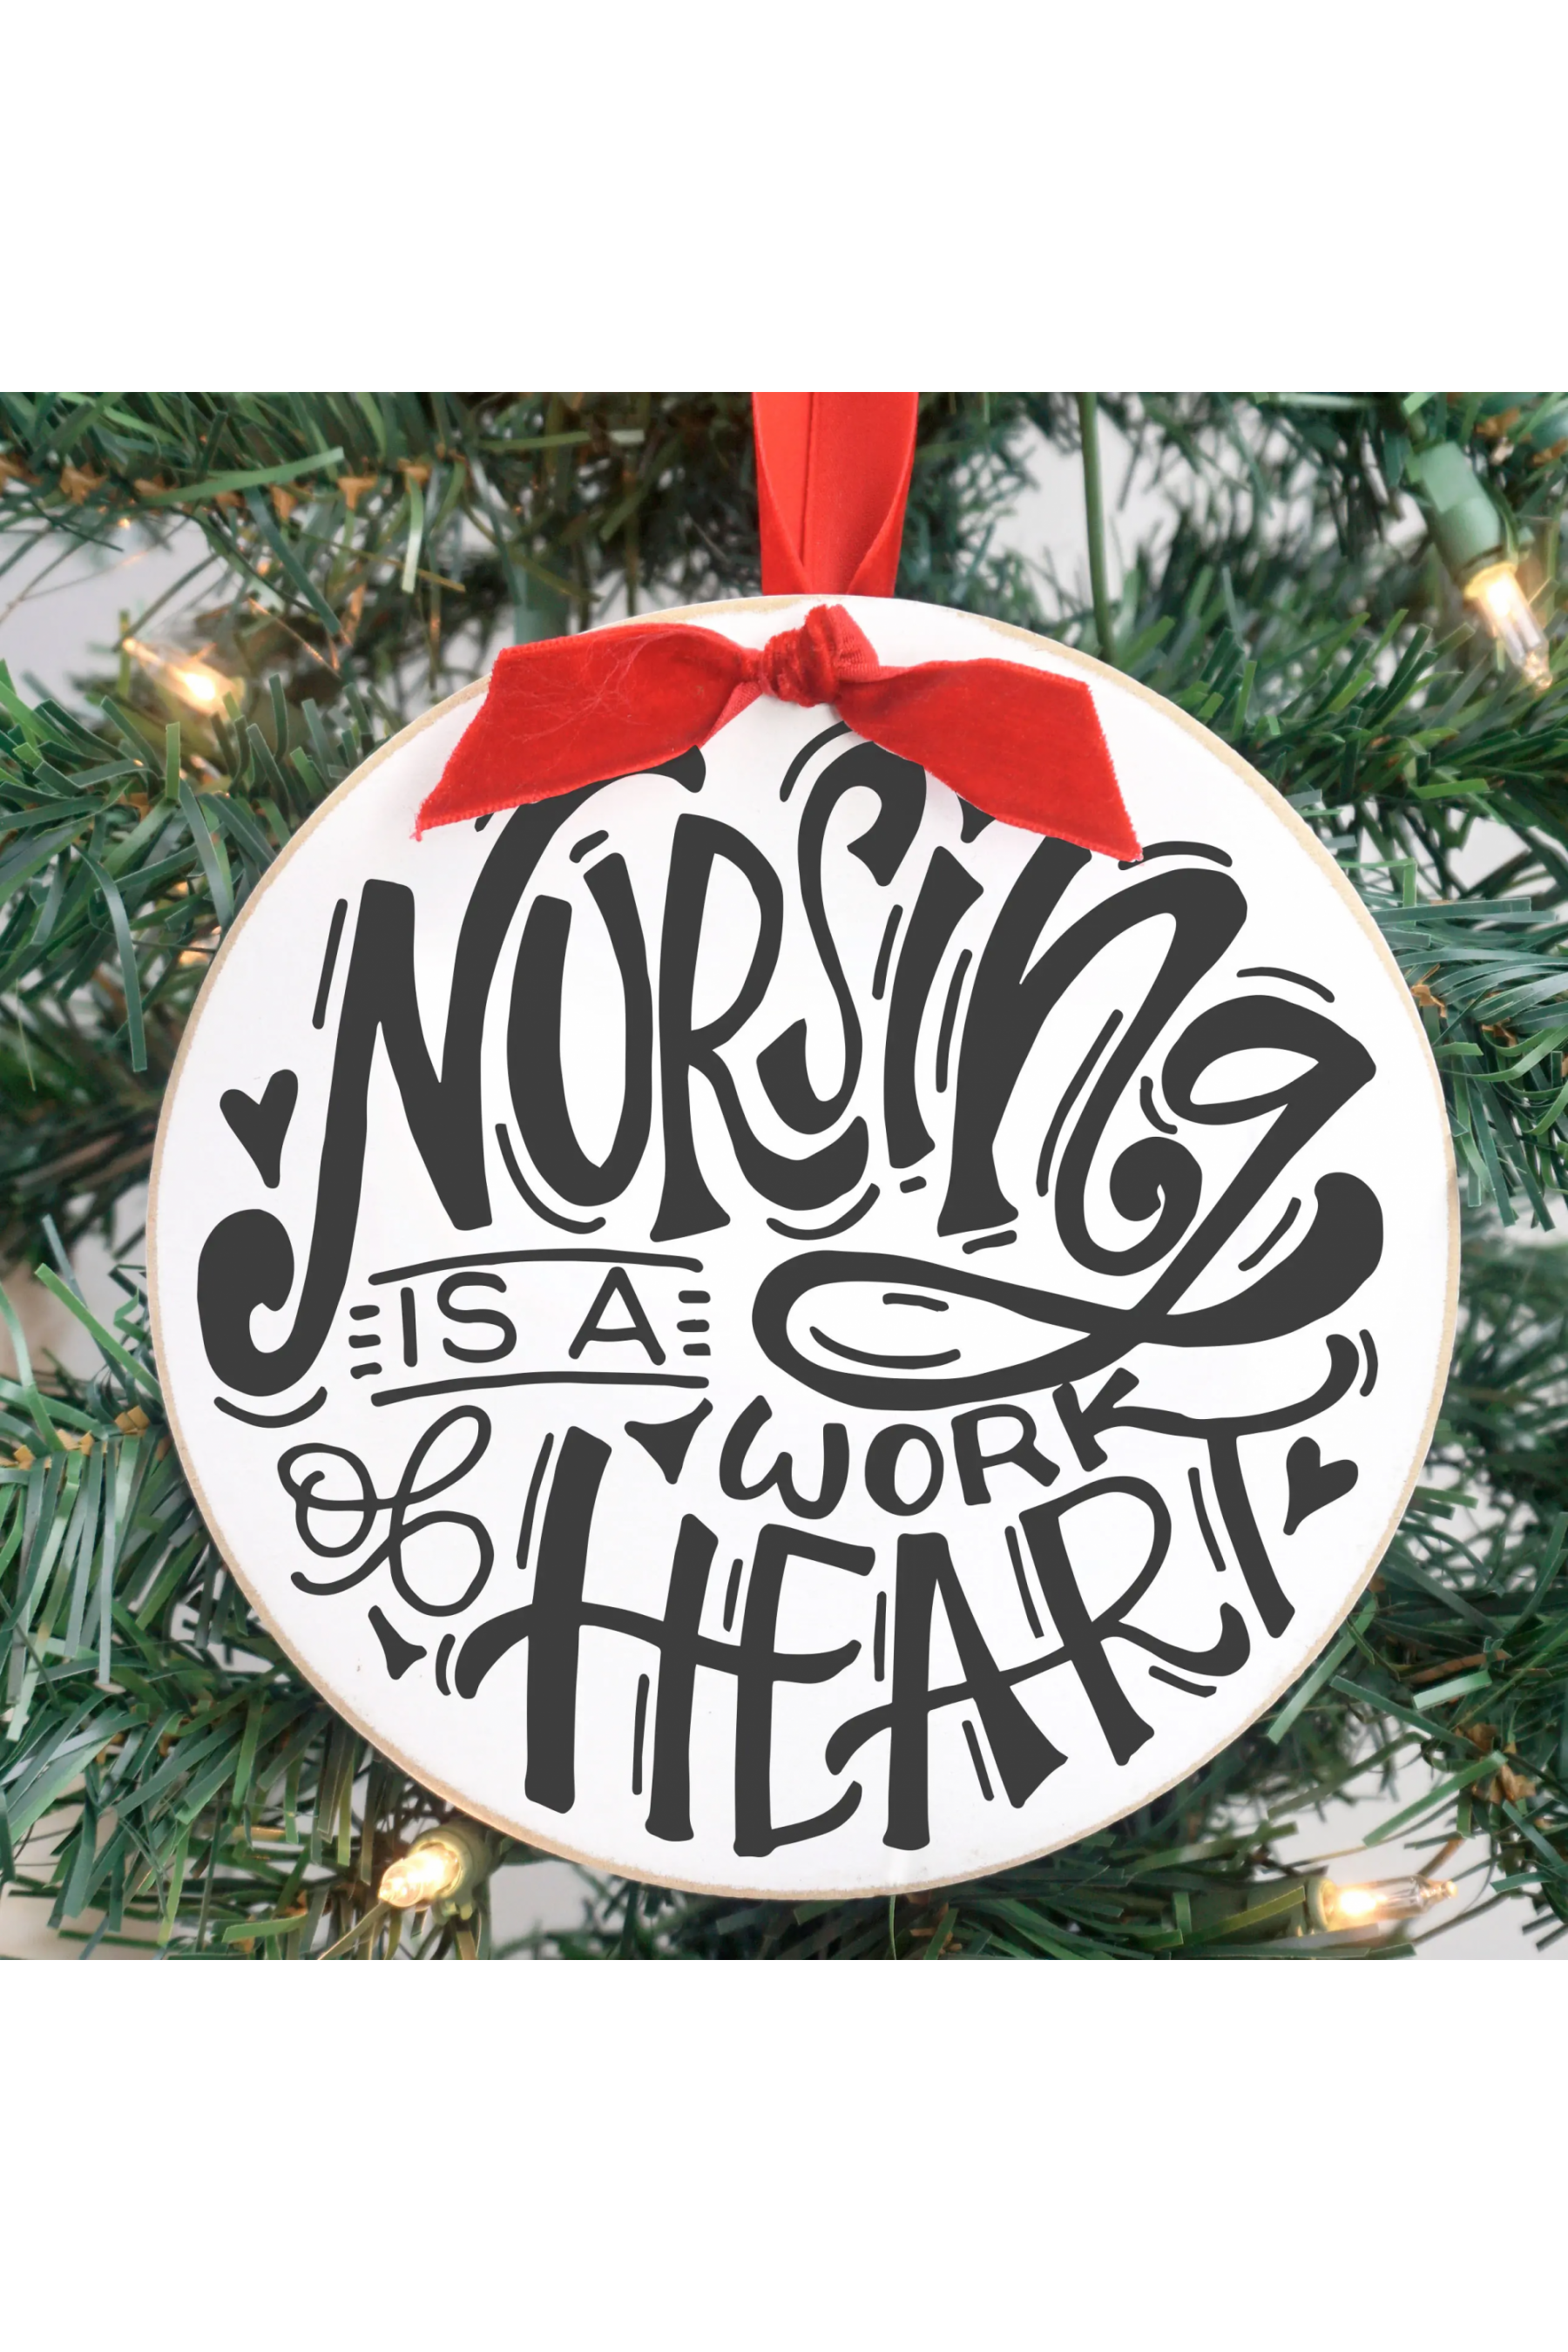 Nursing Is A Work Of Heart Christmas Ornament